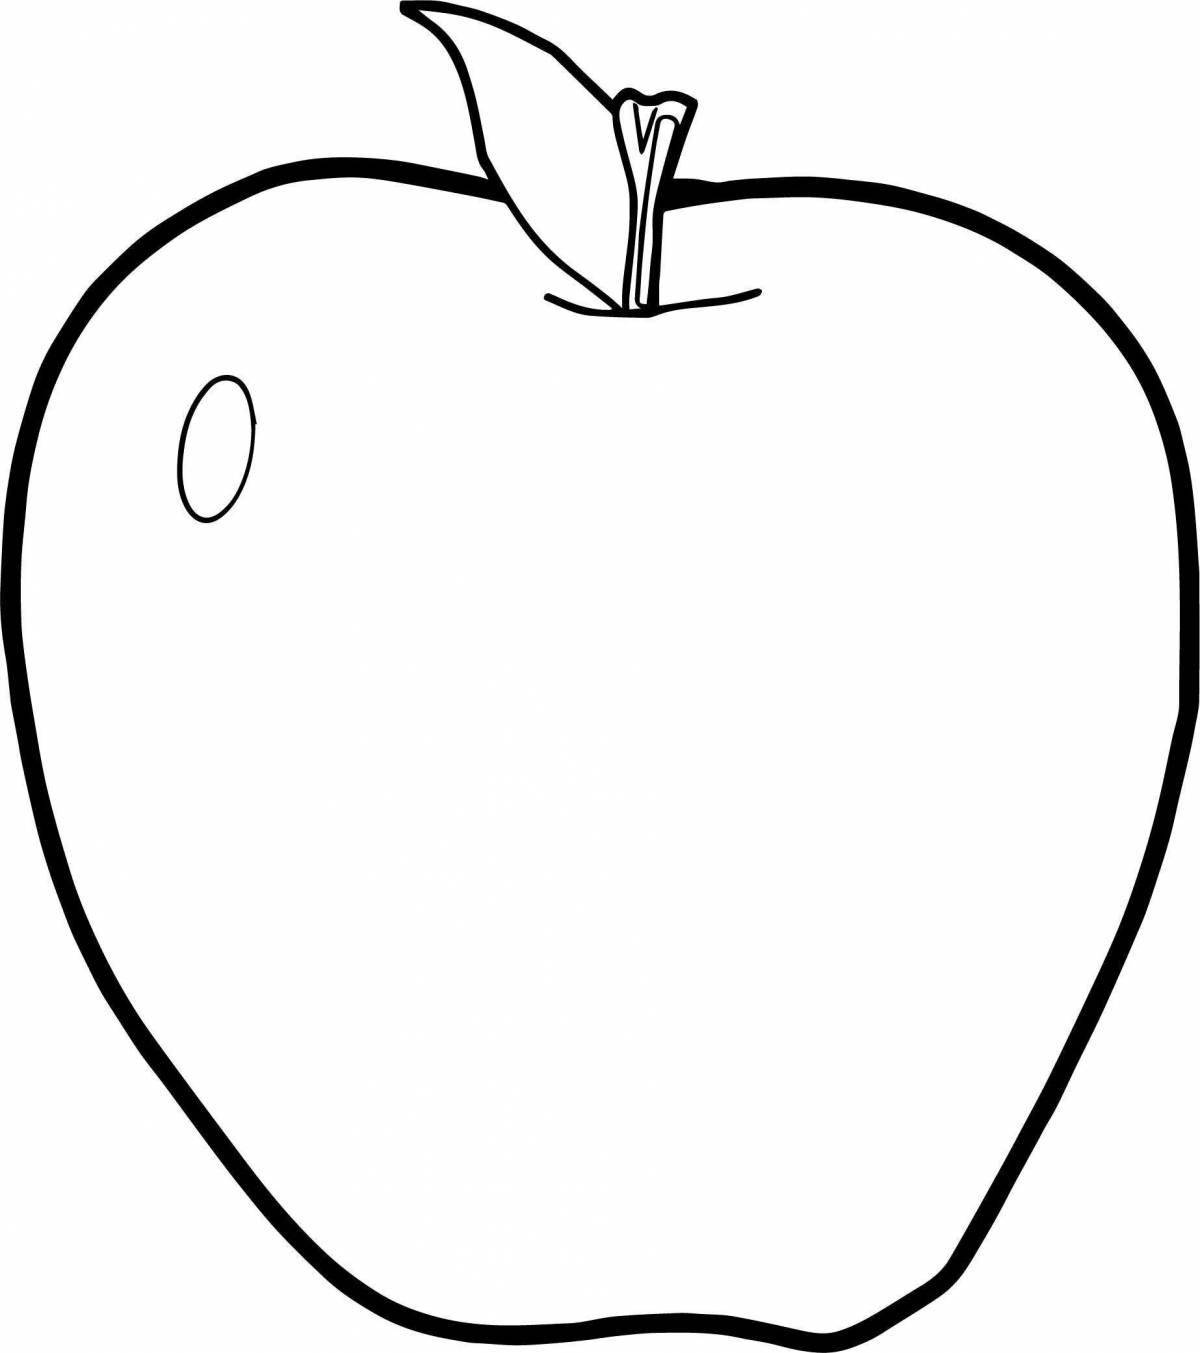 A fun coloring book with an apple pattern